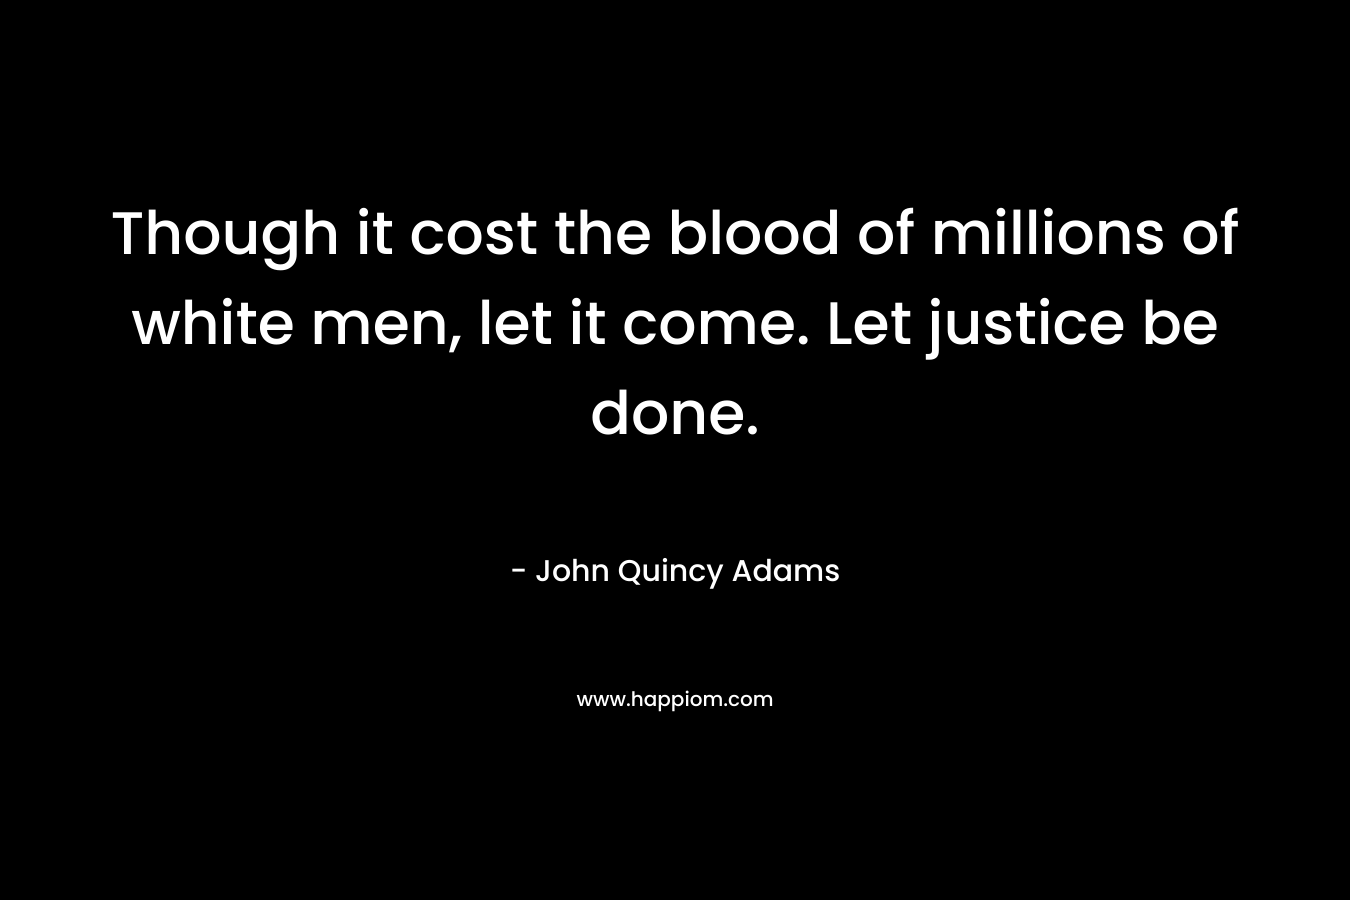 Though it cost the blood of millions of white men, let it come. Let justice be done.